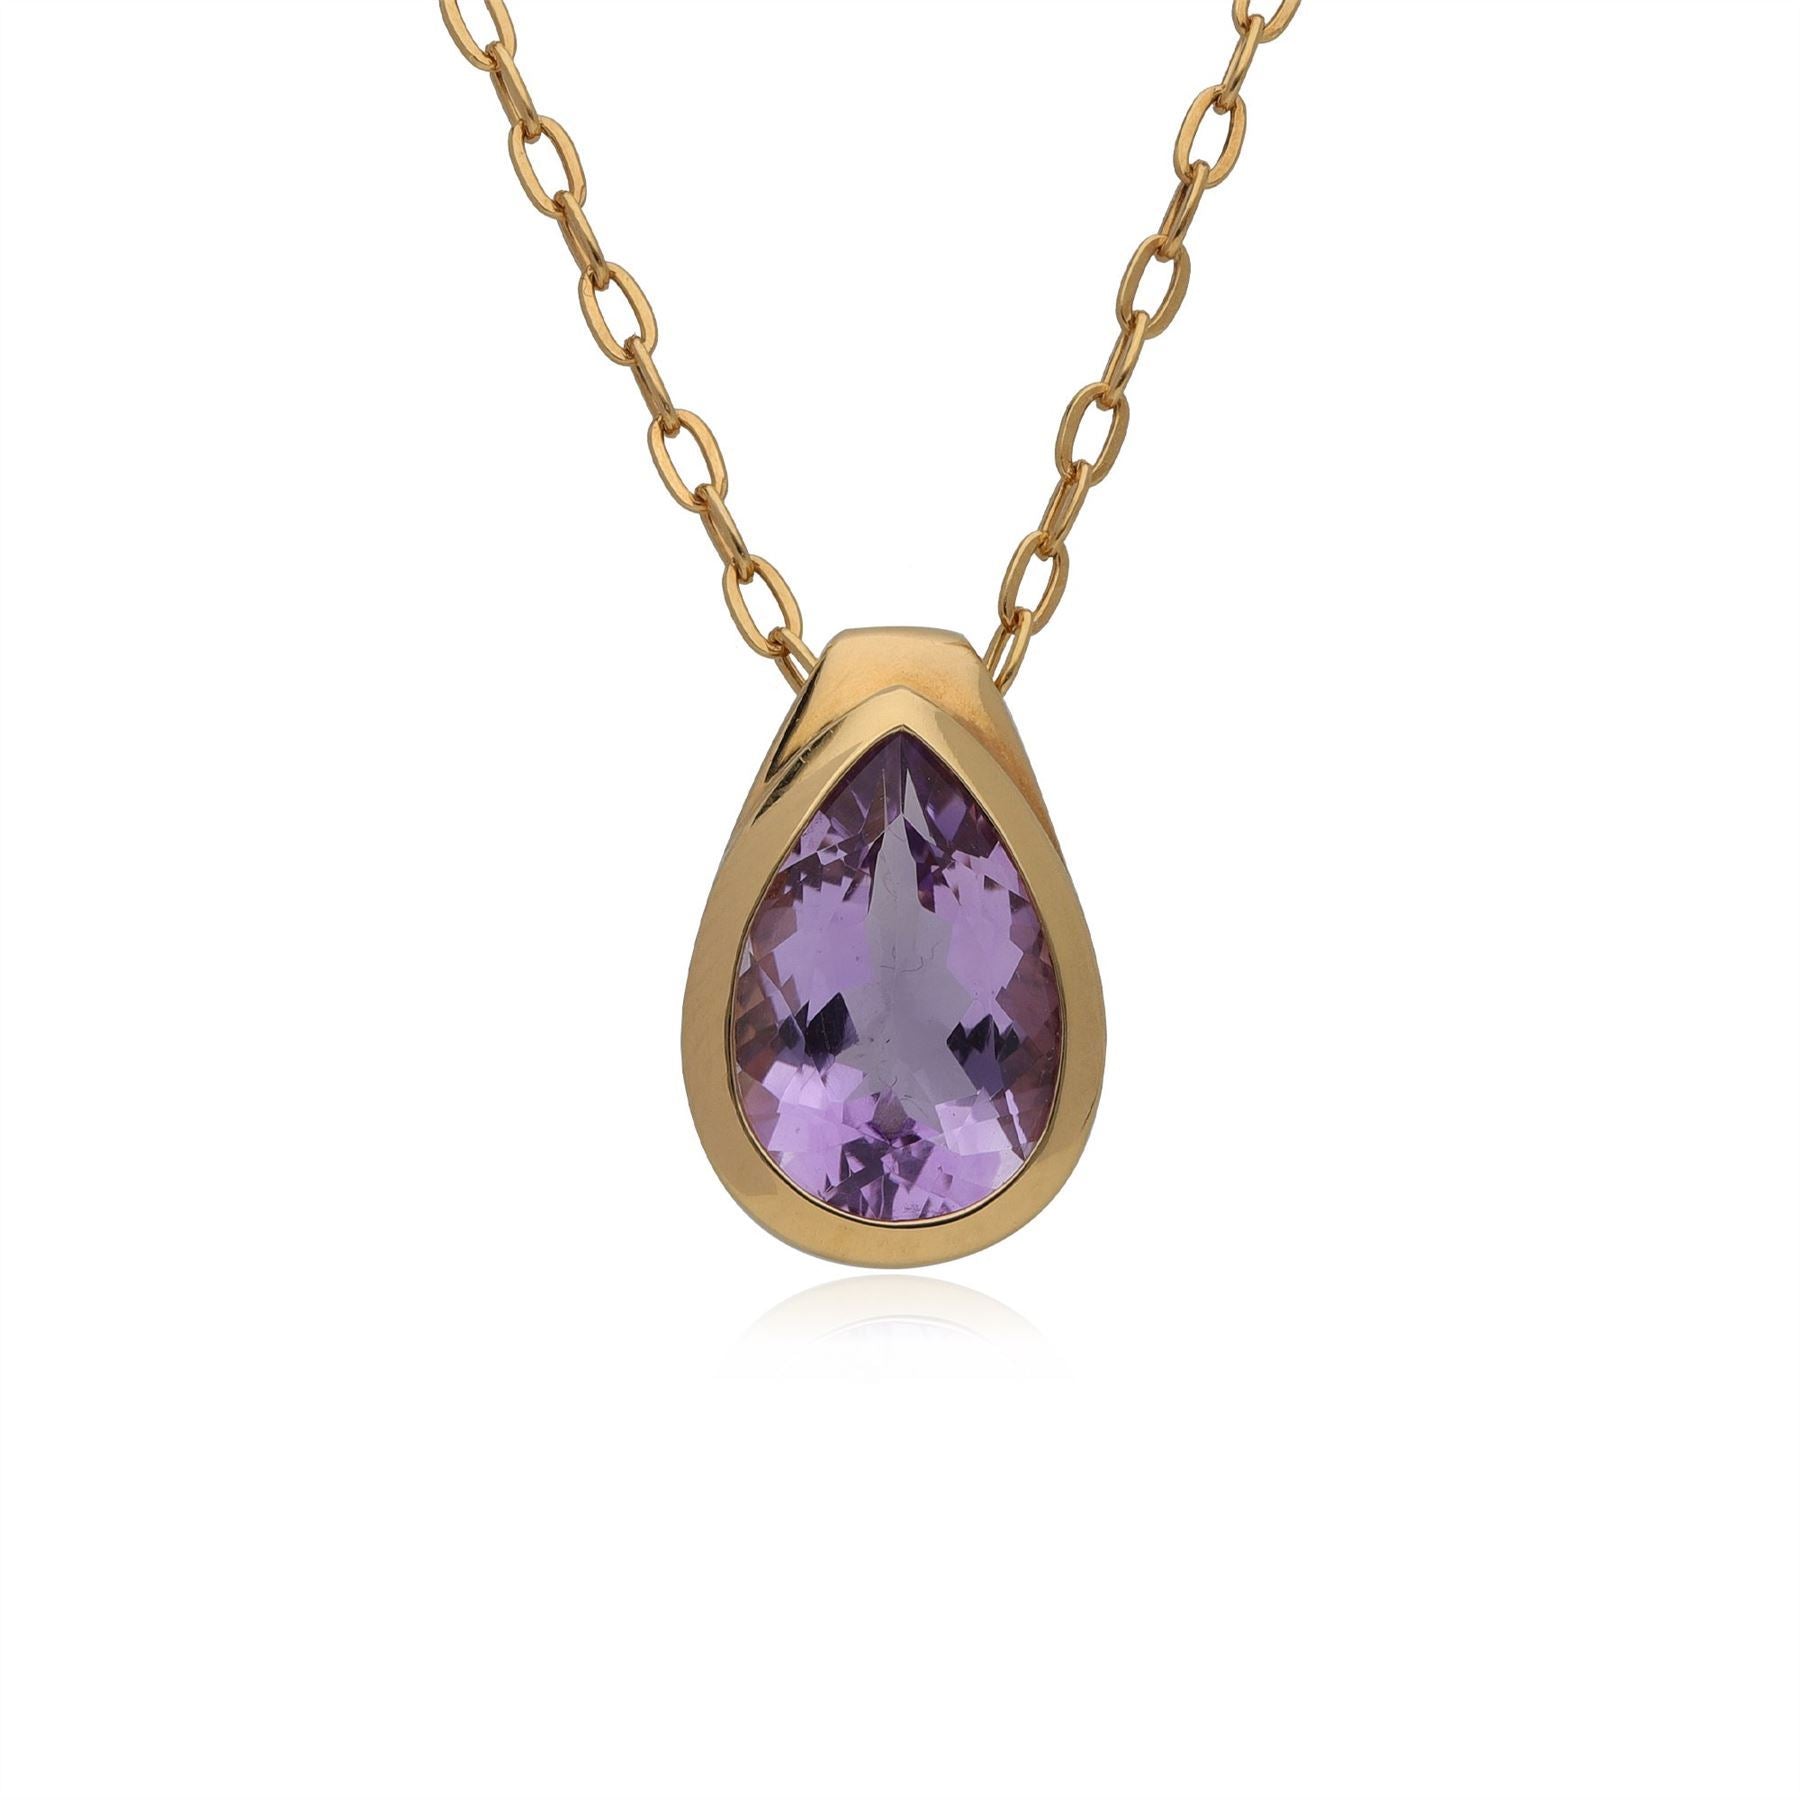 Kosmos Pear Cut Amethyst Drop Necklace in Gold Plated Sterling Silver